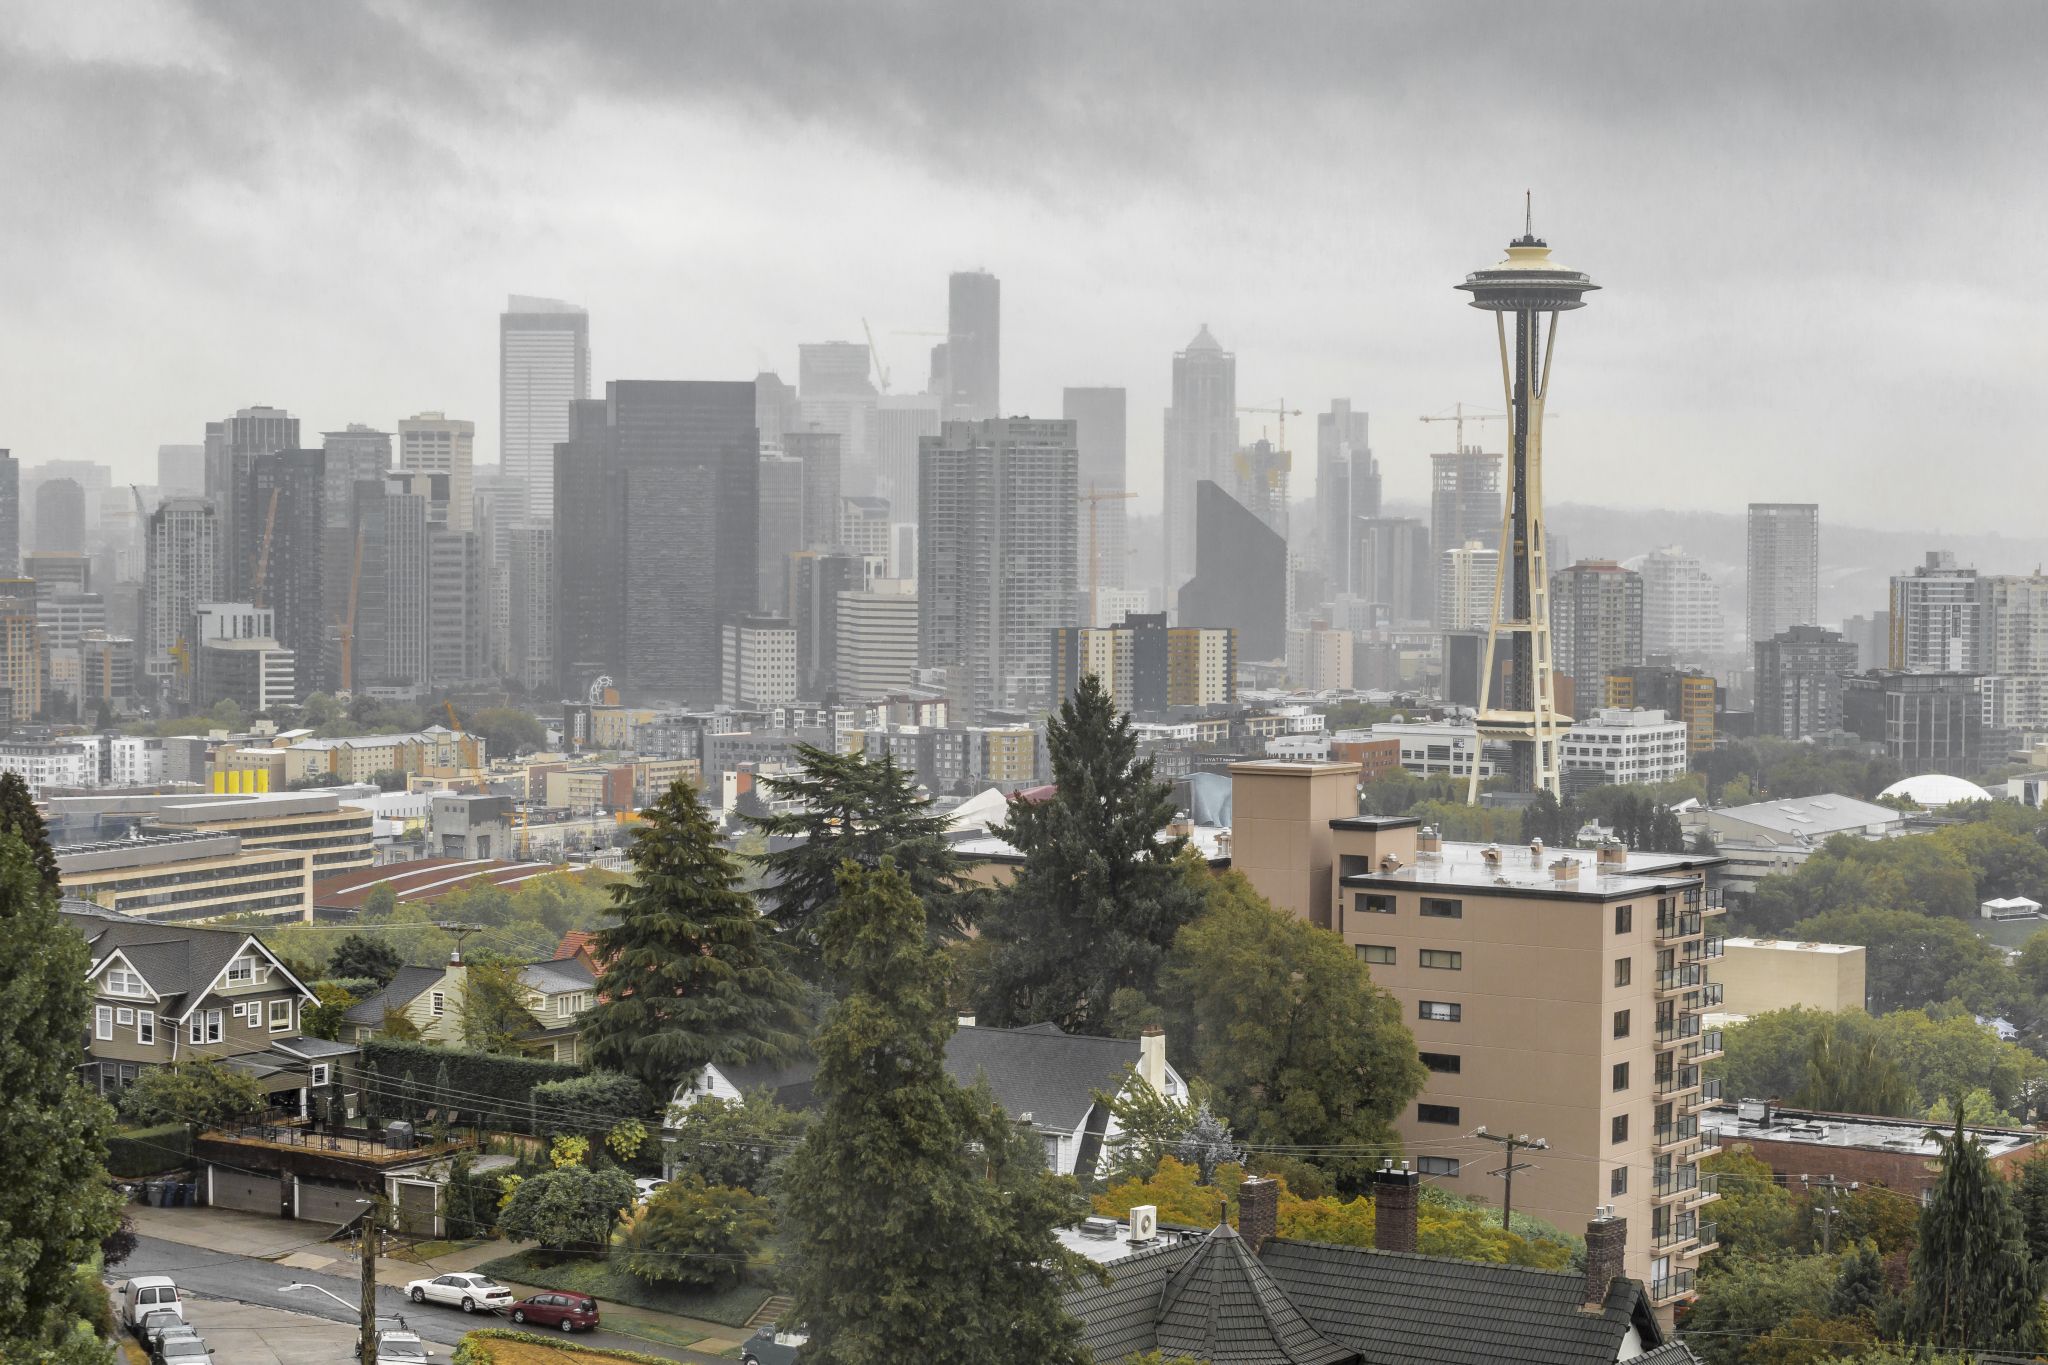 Seattle could see 40 mph winds on Friday as storm system rolls through